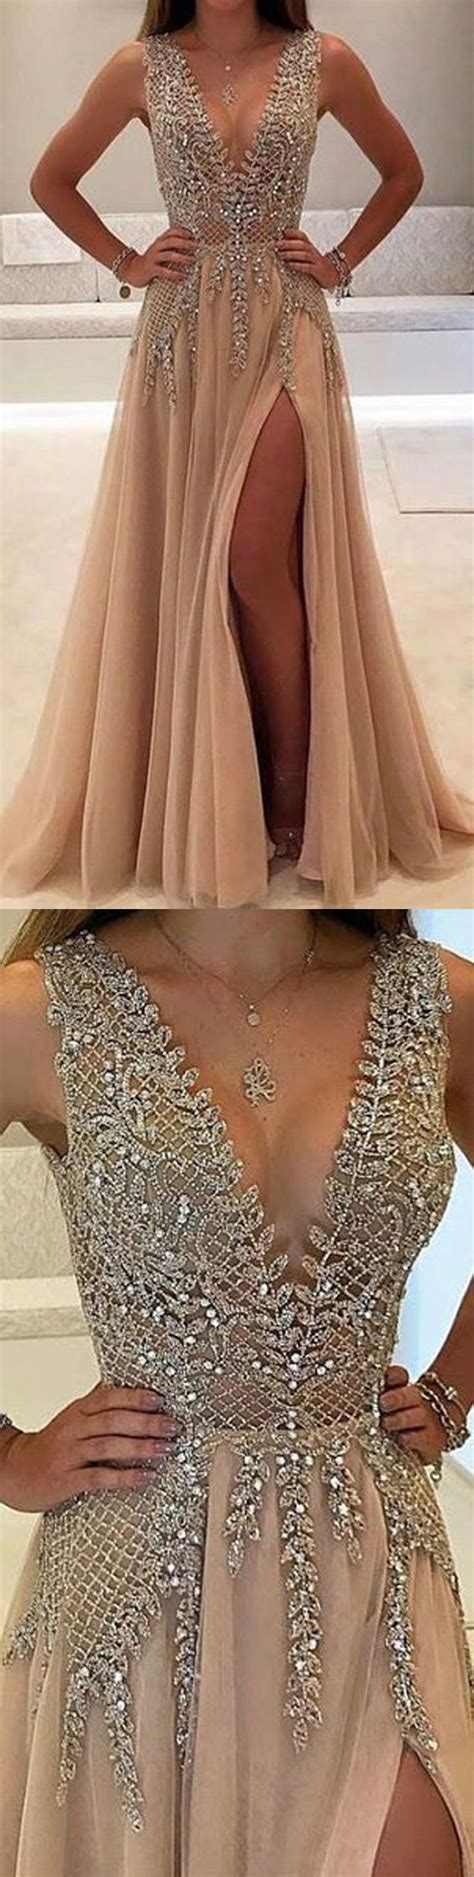 backless high slit sexy prom dresses champagne chiffon prom dress sxy party dress with beading